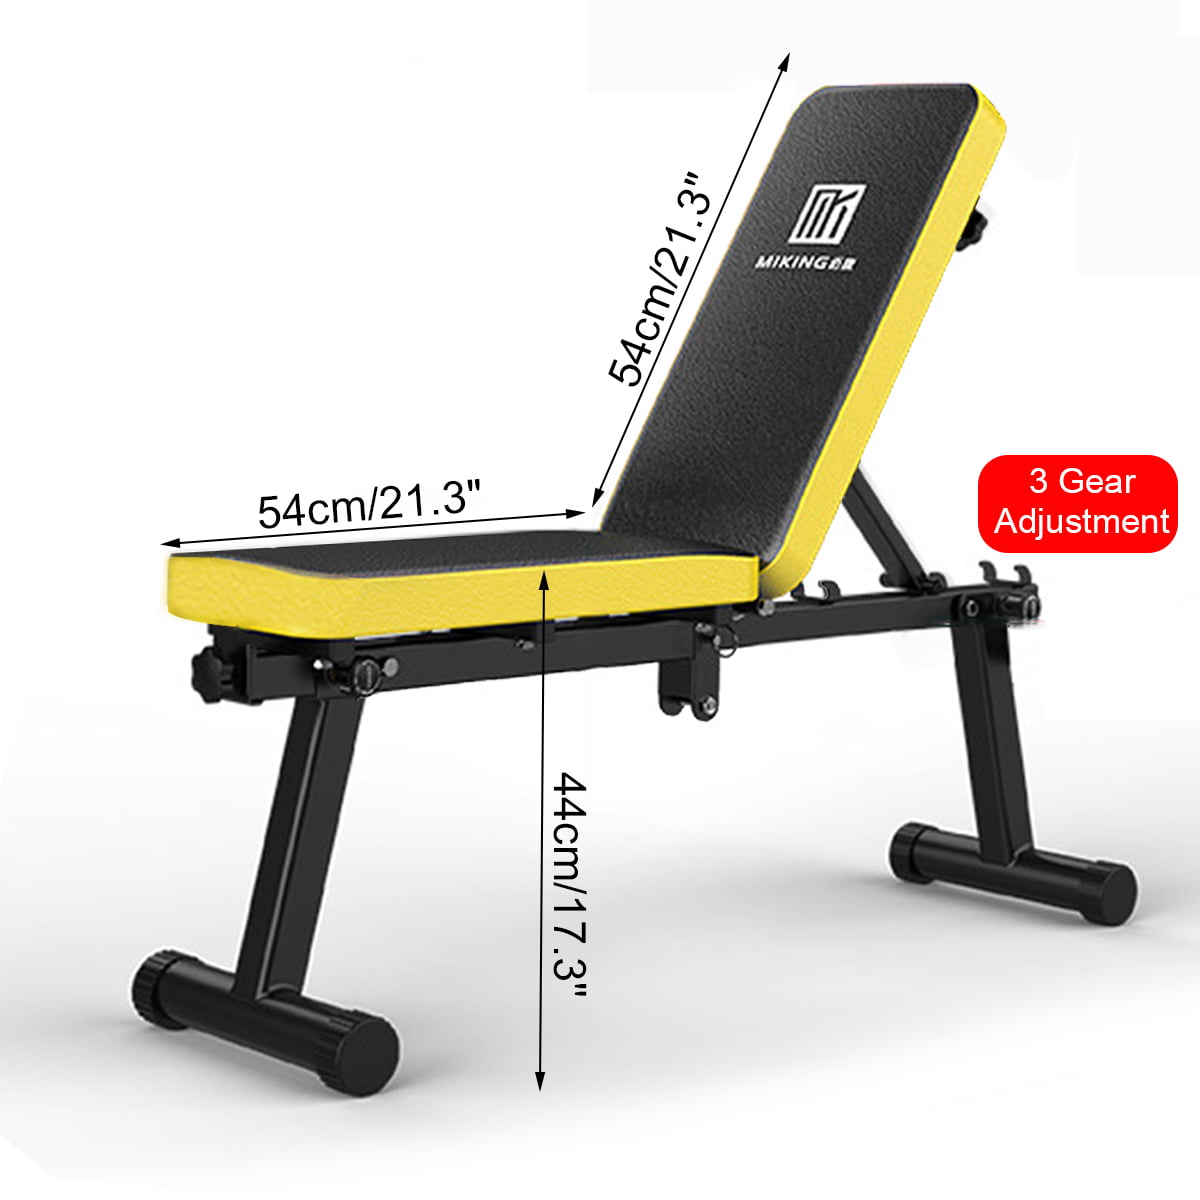 Adjustable Big Weight Bench Incline Decline Foldable Full Body Workout Exercise 